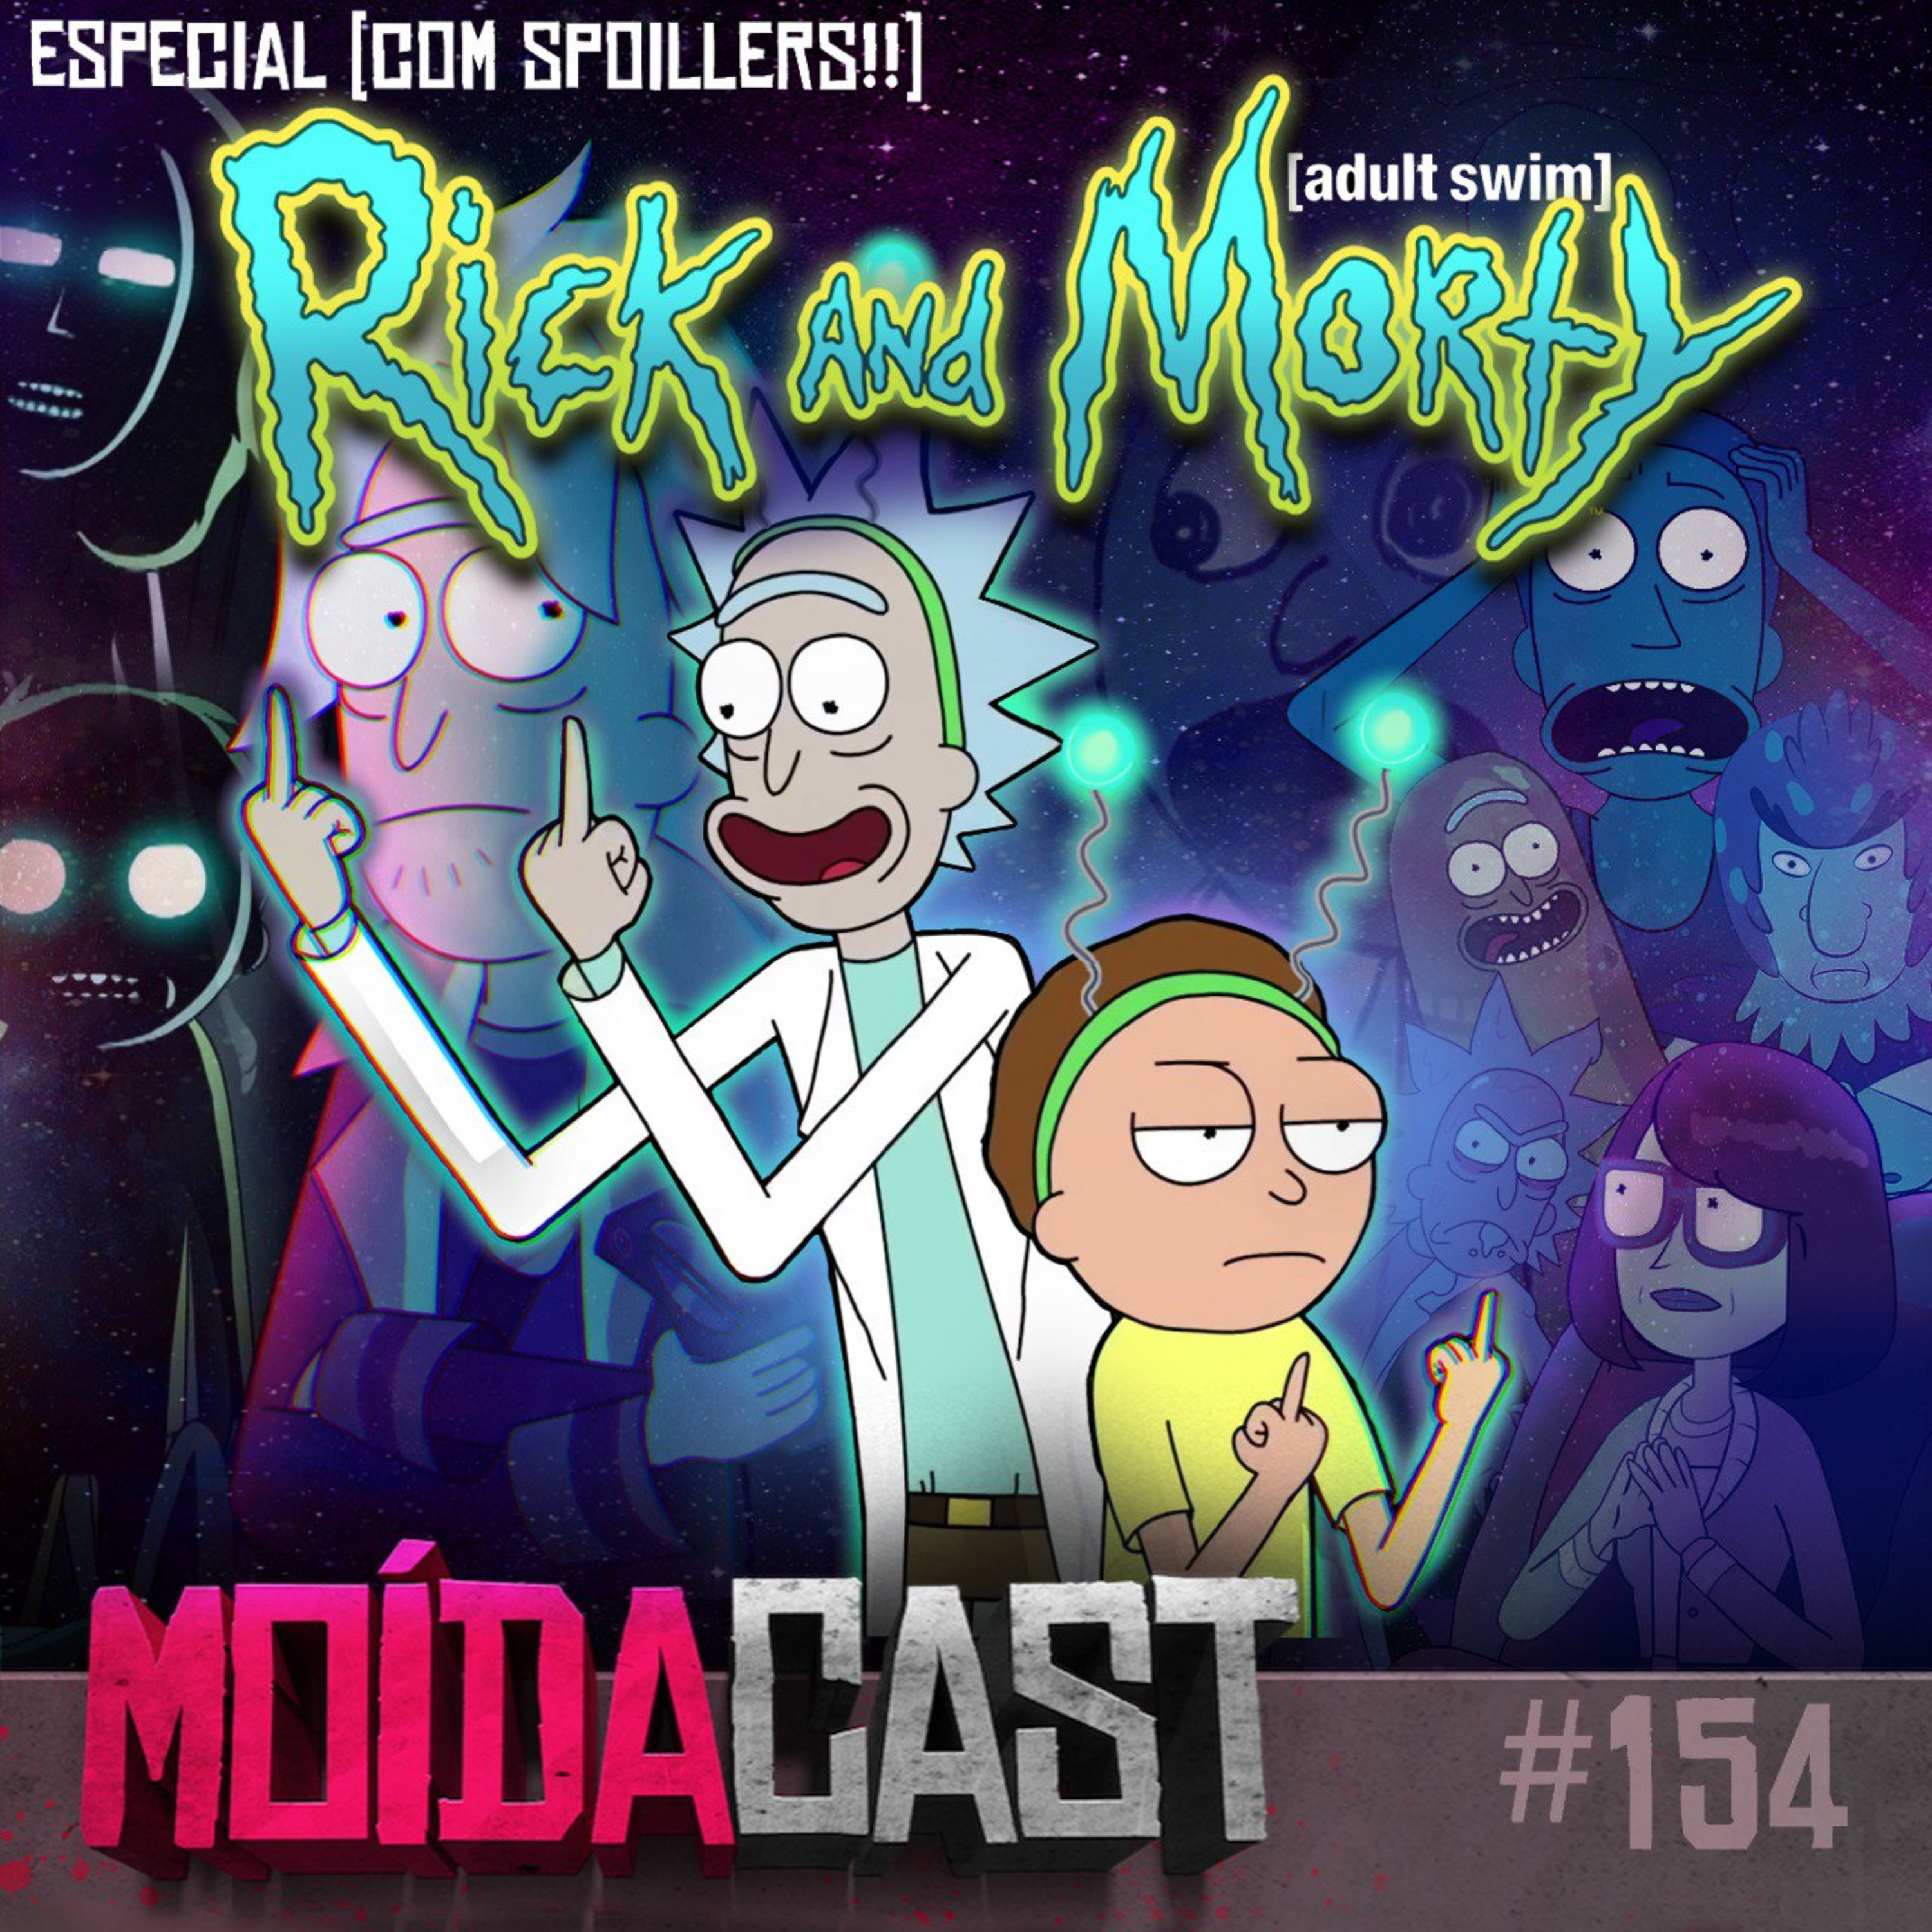 #154 ESPECIAL RICK AND MORTY